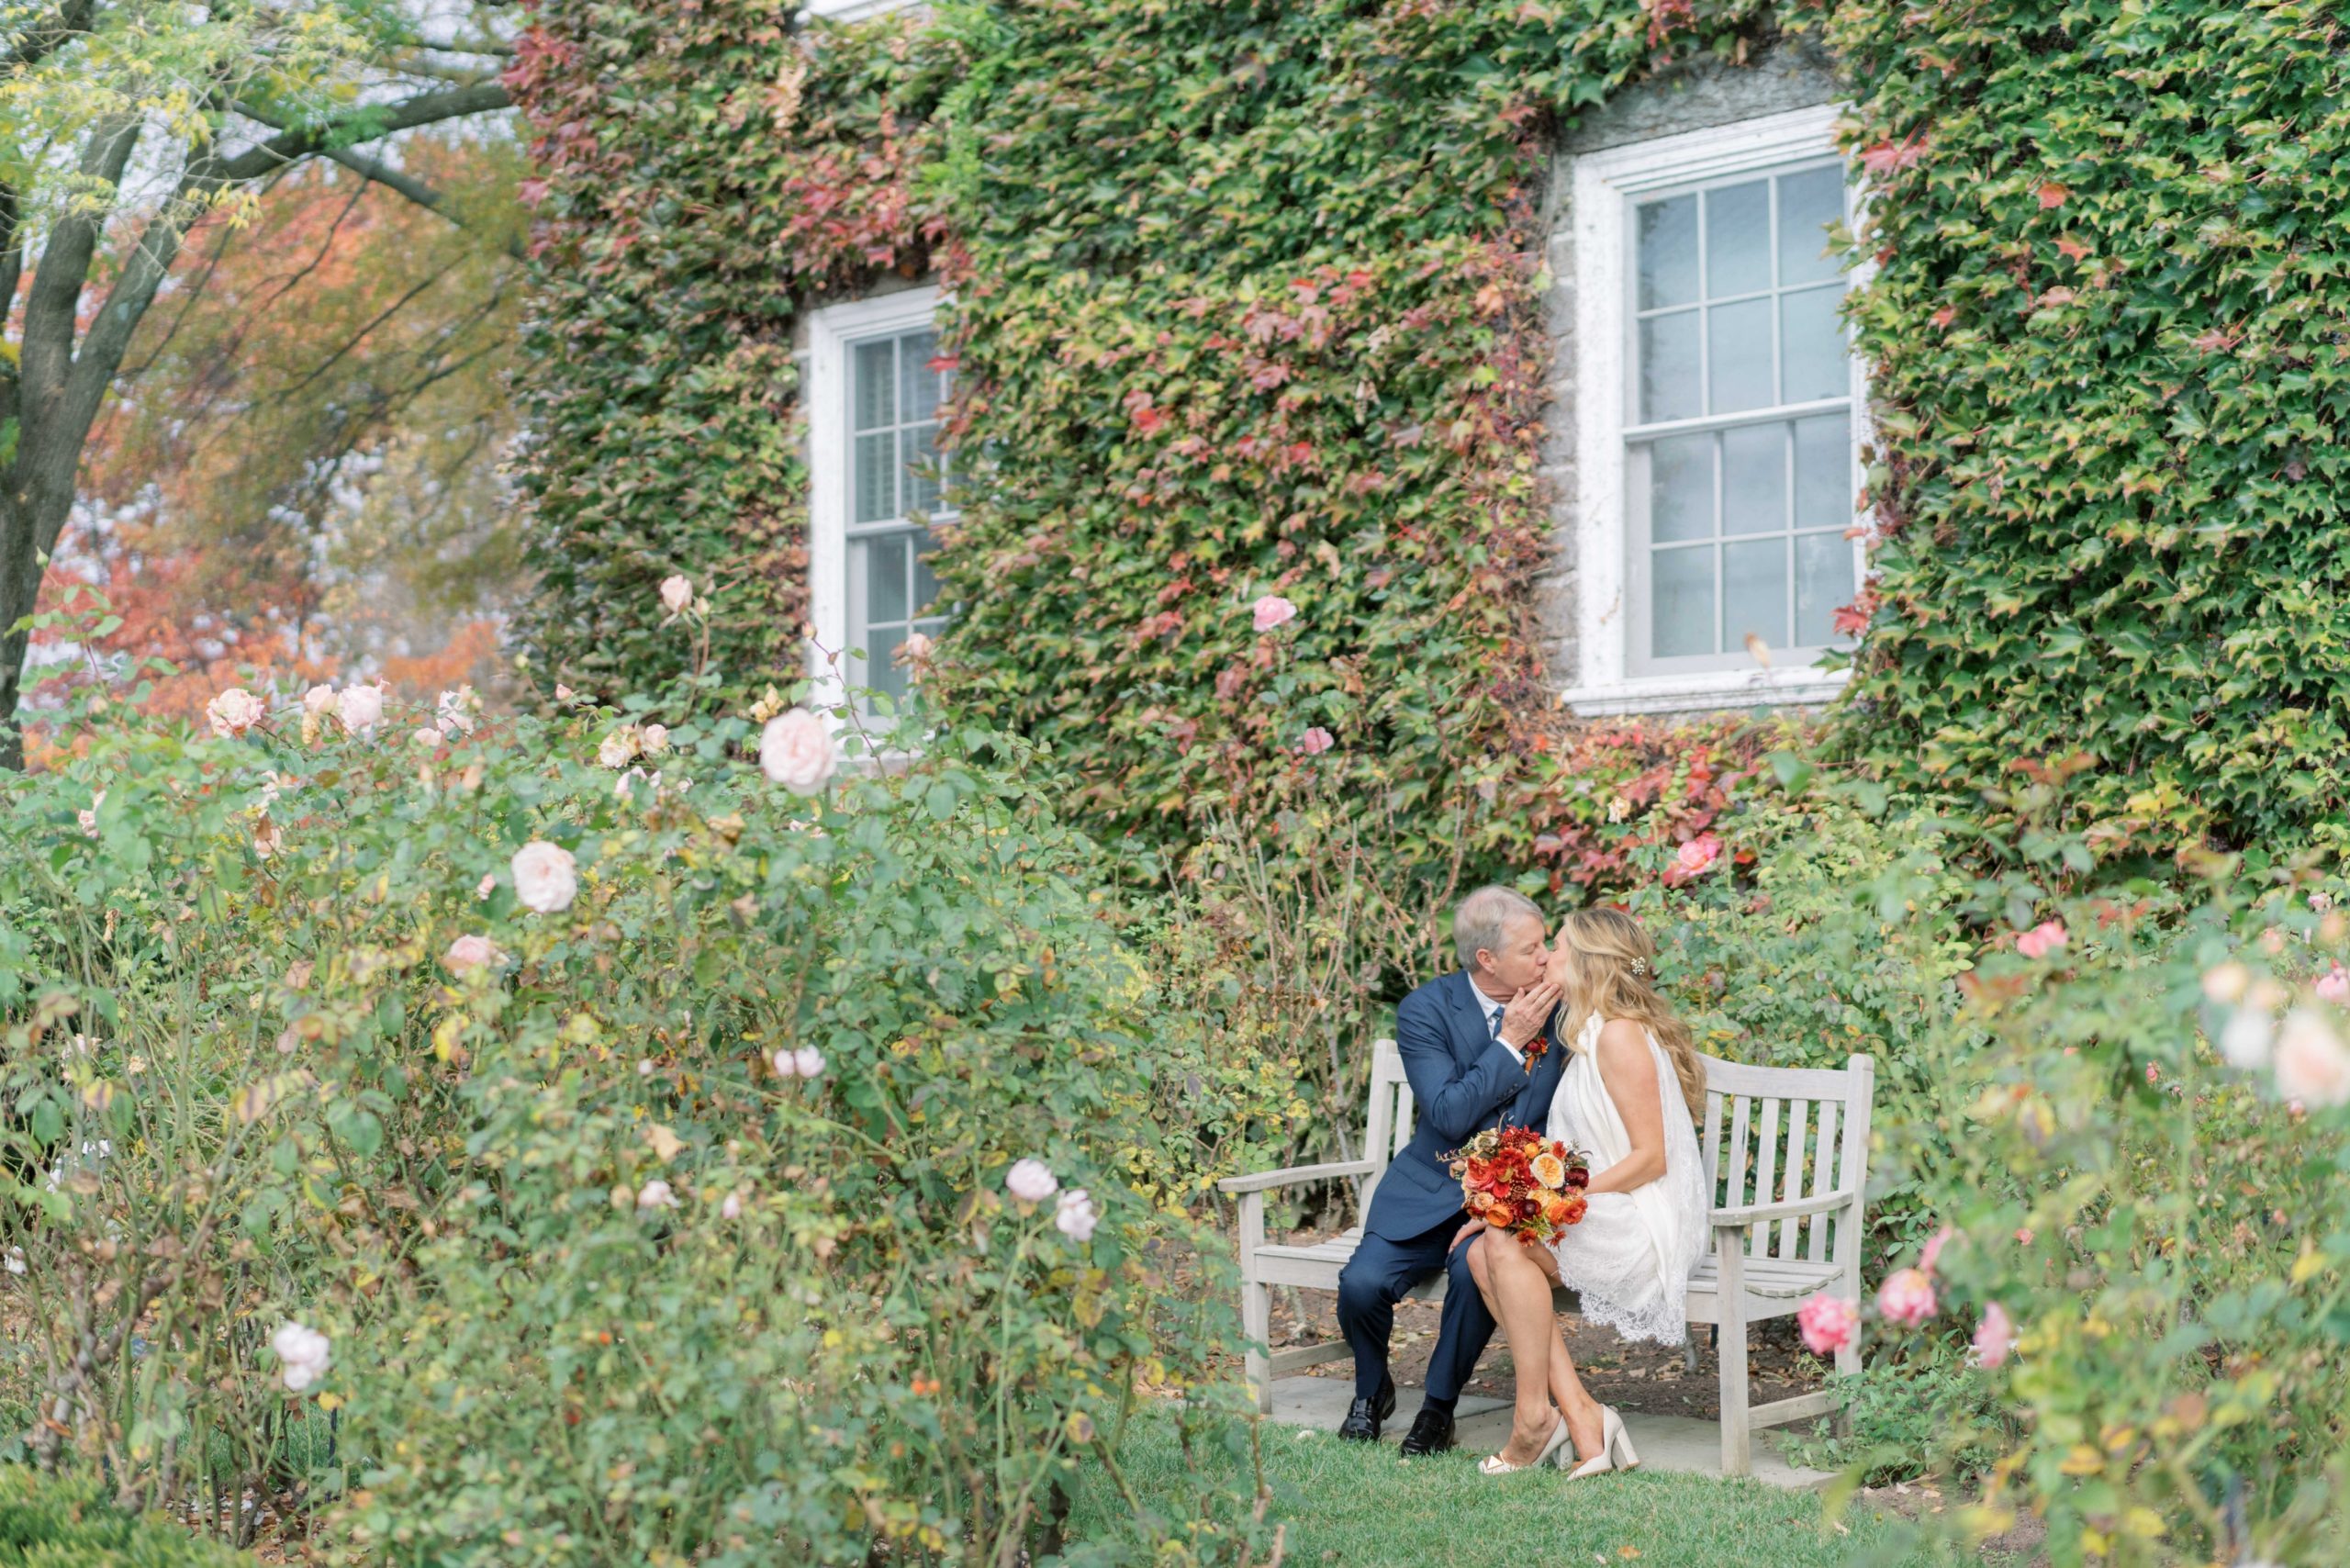 An intimate elopement portrait session at a private residence and the Chevy Chase Club in Maryland outside of Washington, DC.